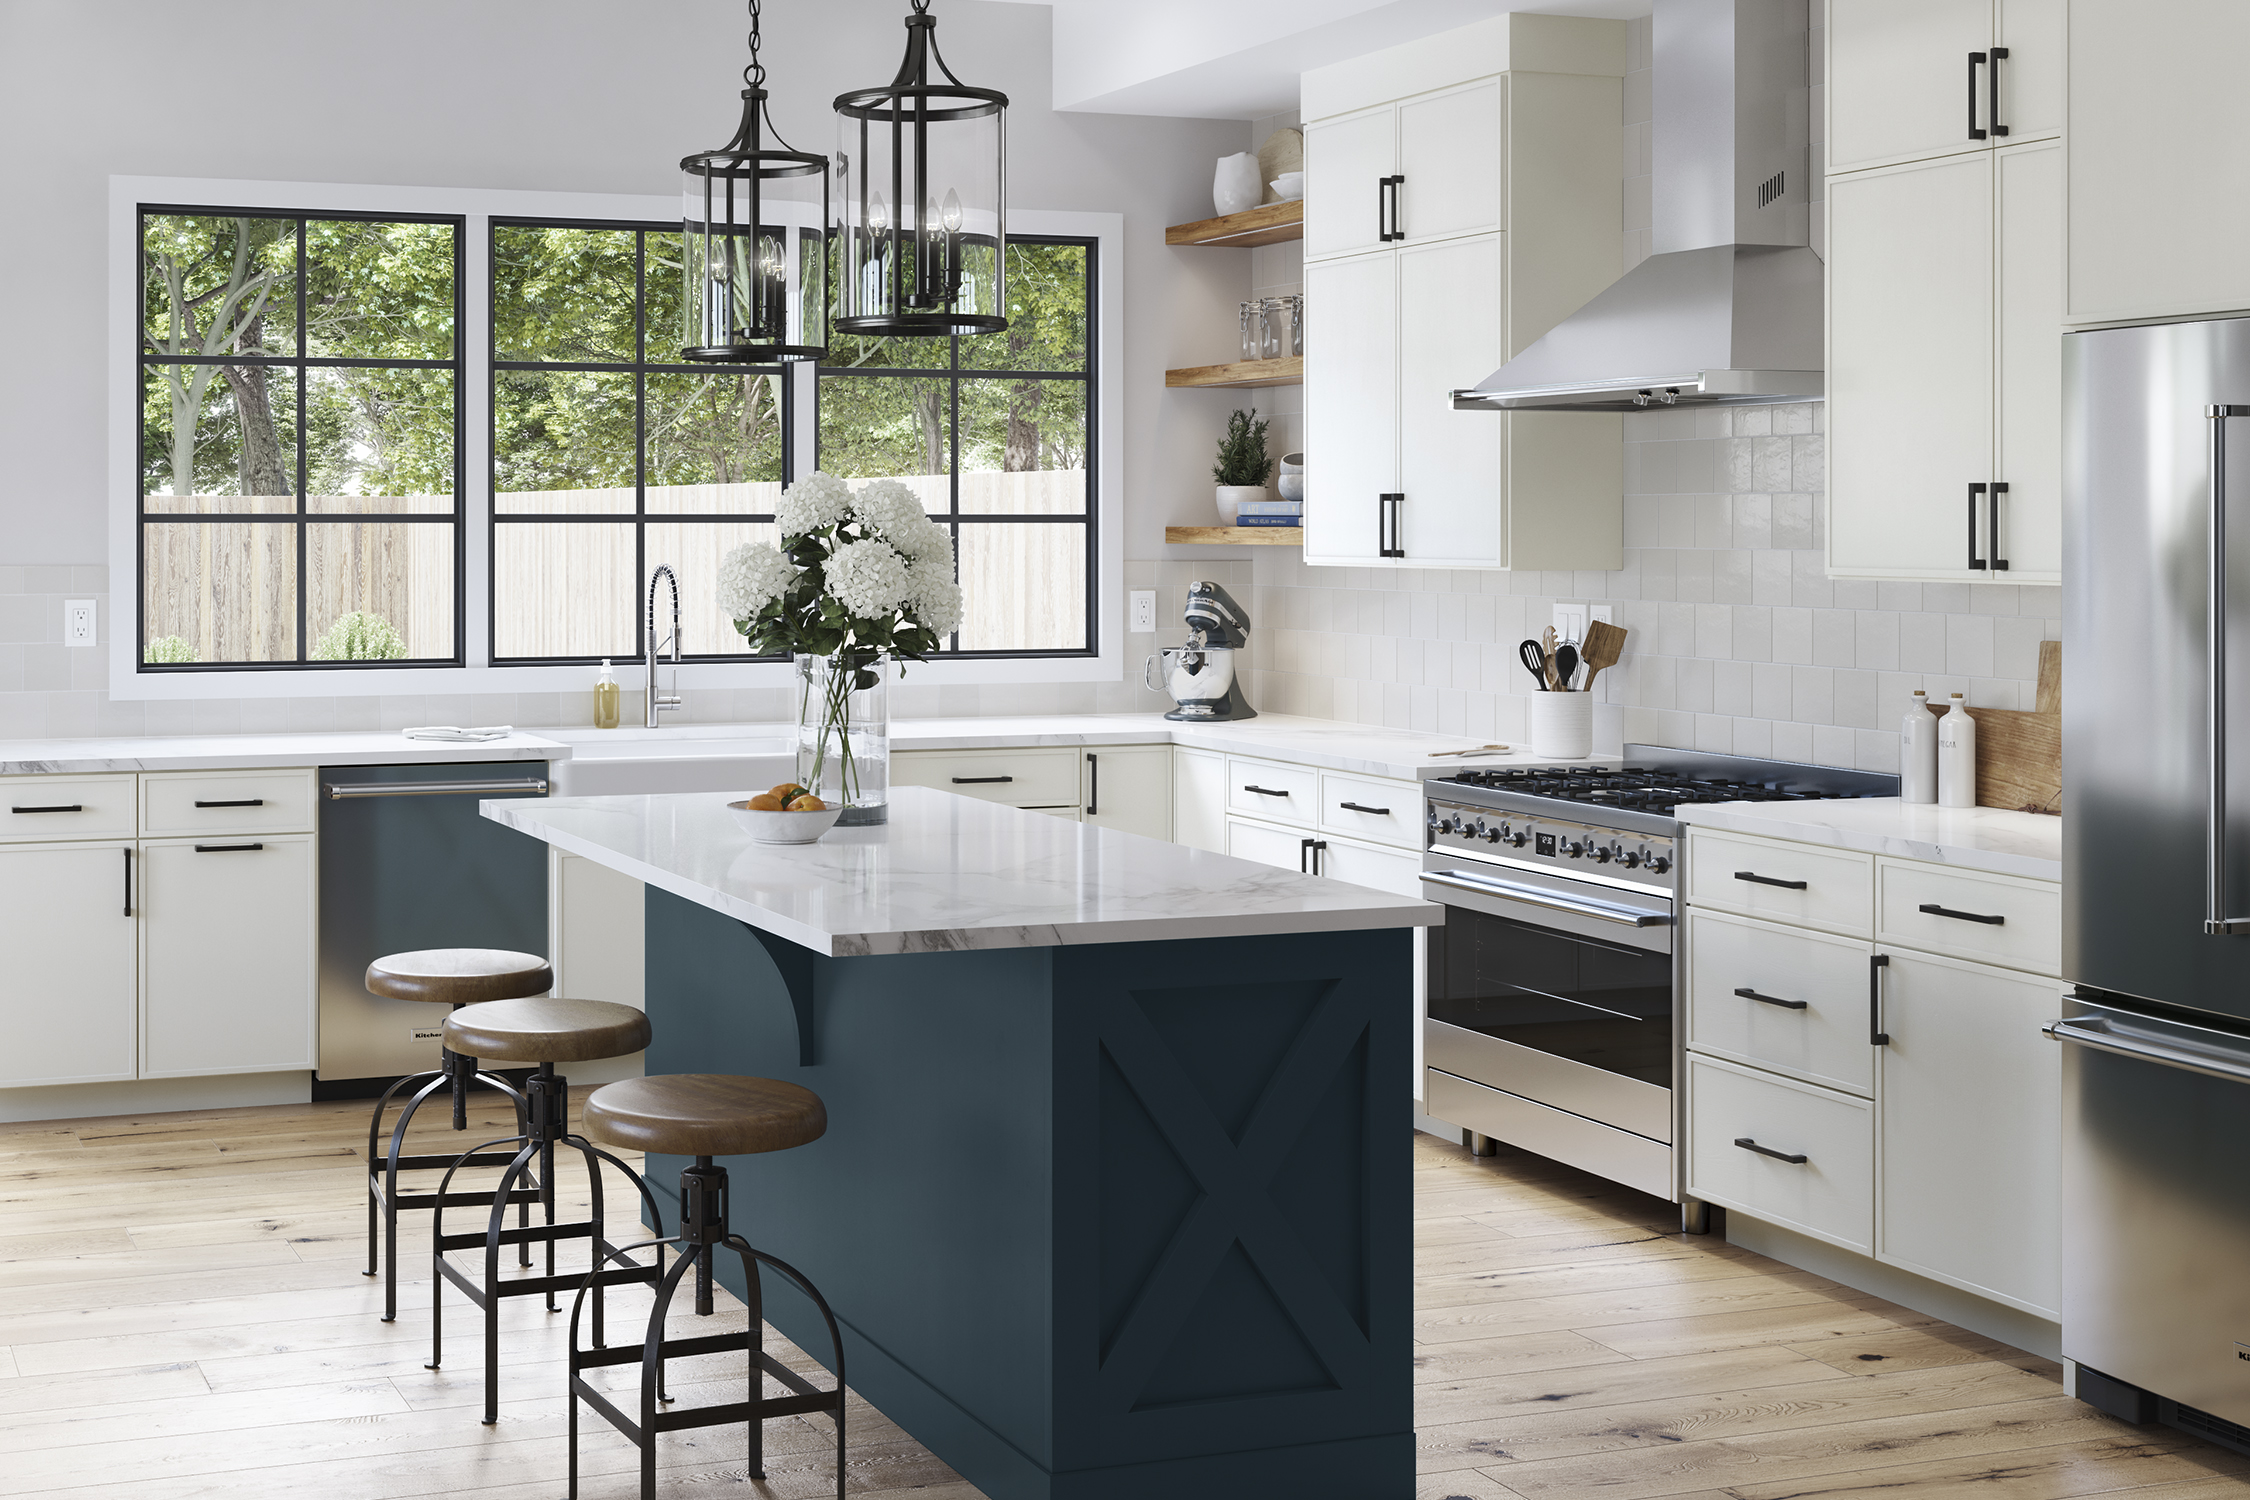 You are currently viewing Kitchen Remodel Inspiration: 4 Questions to Ask Yourself When Choosing a Style